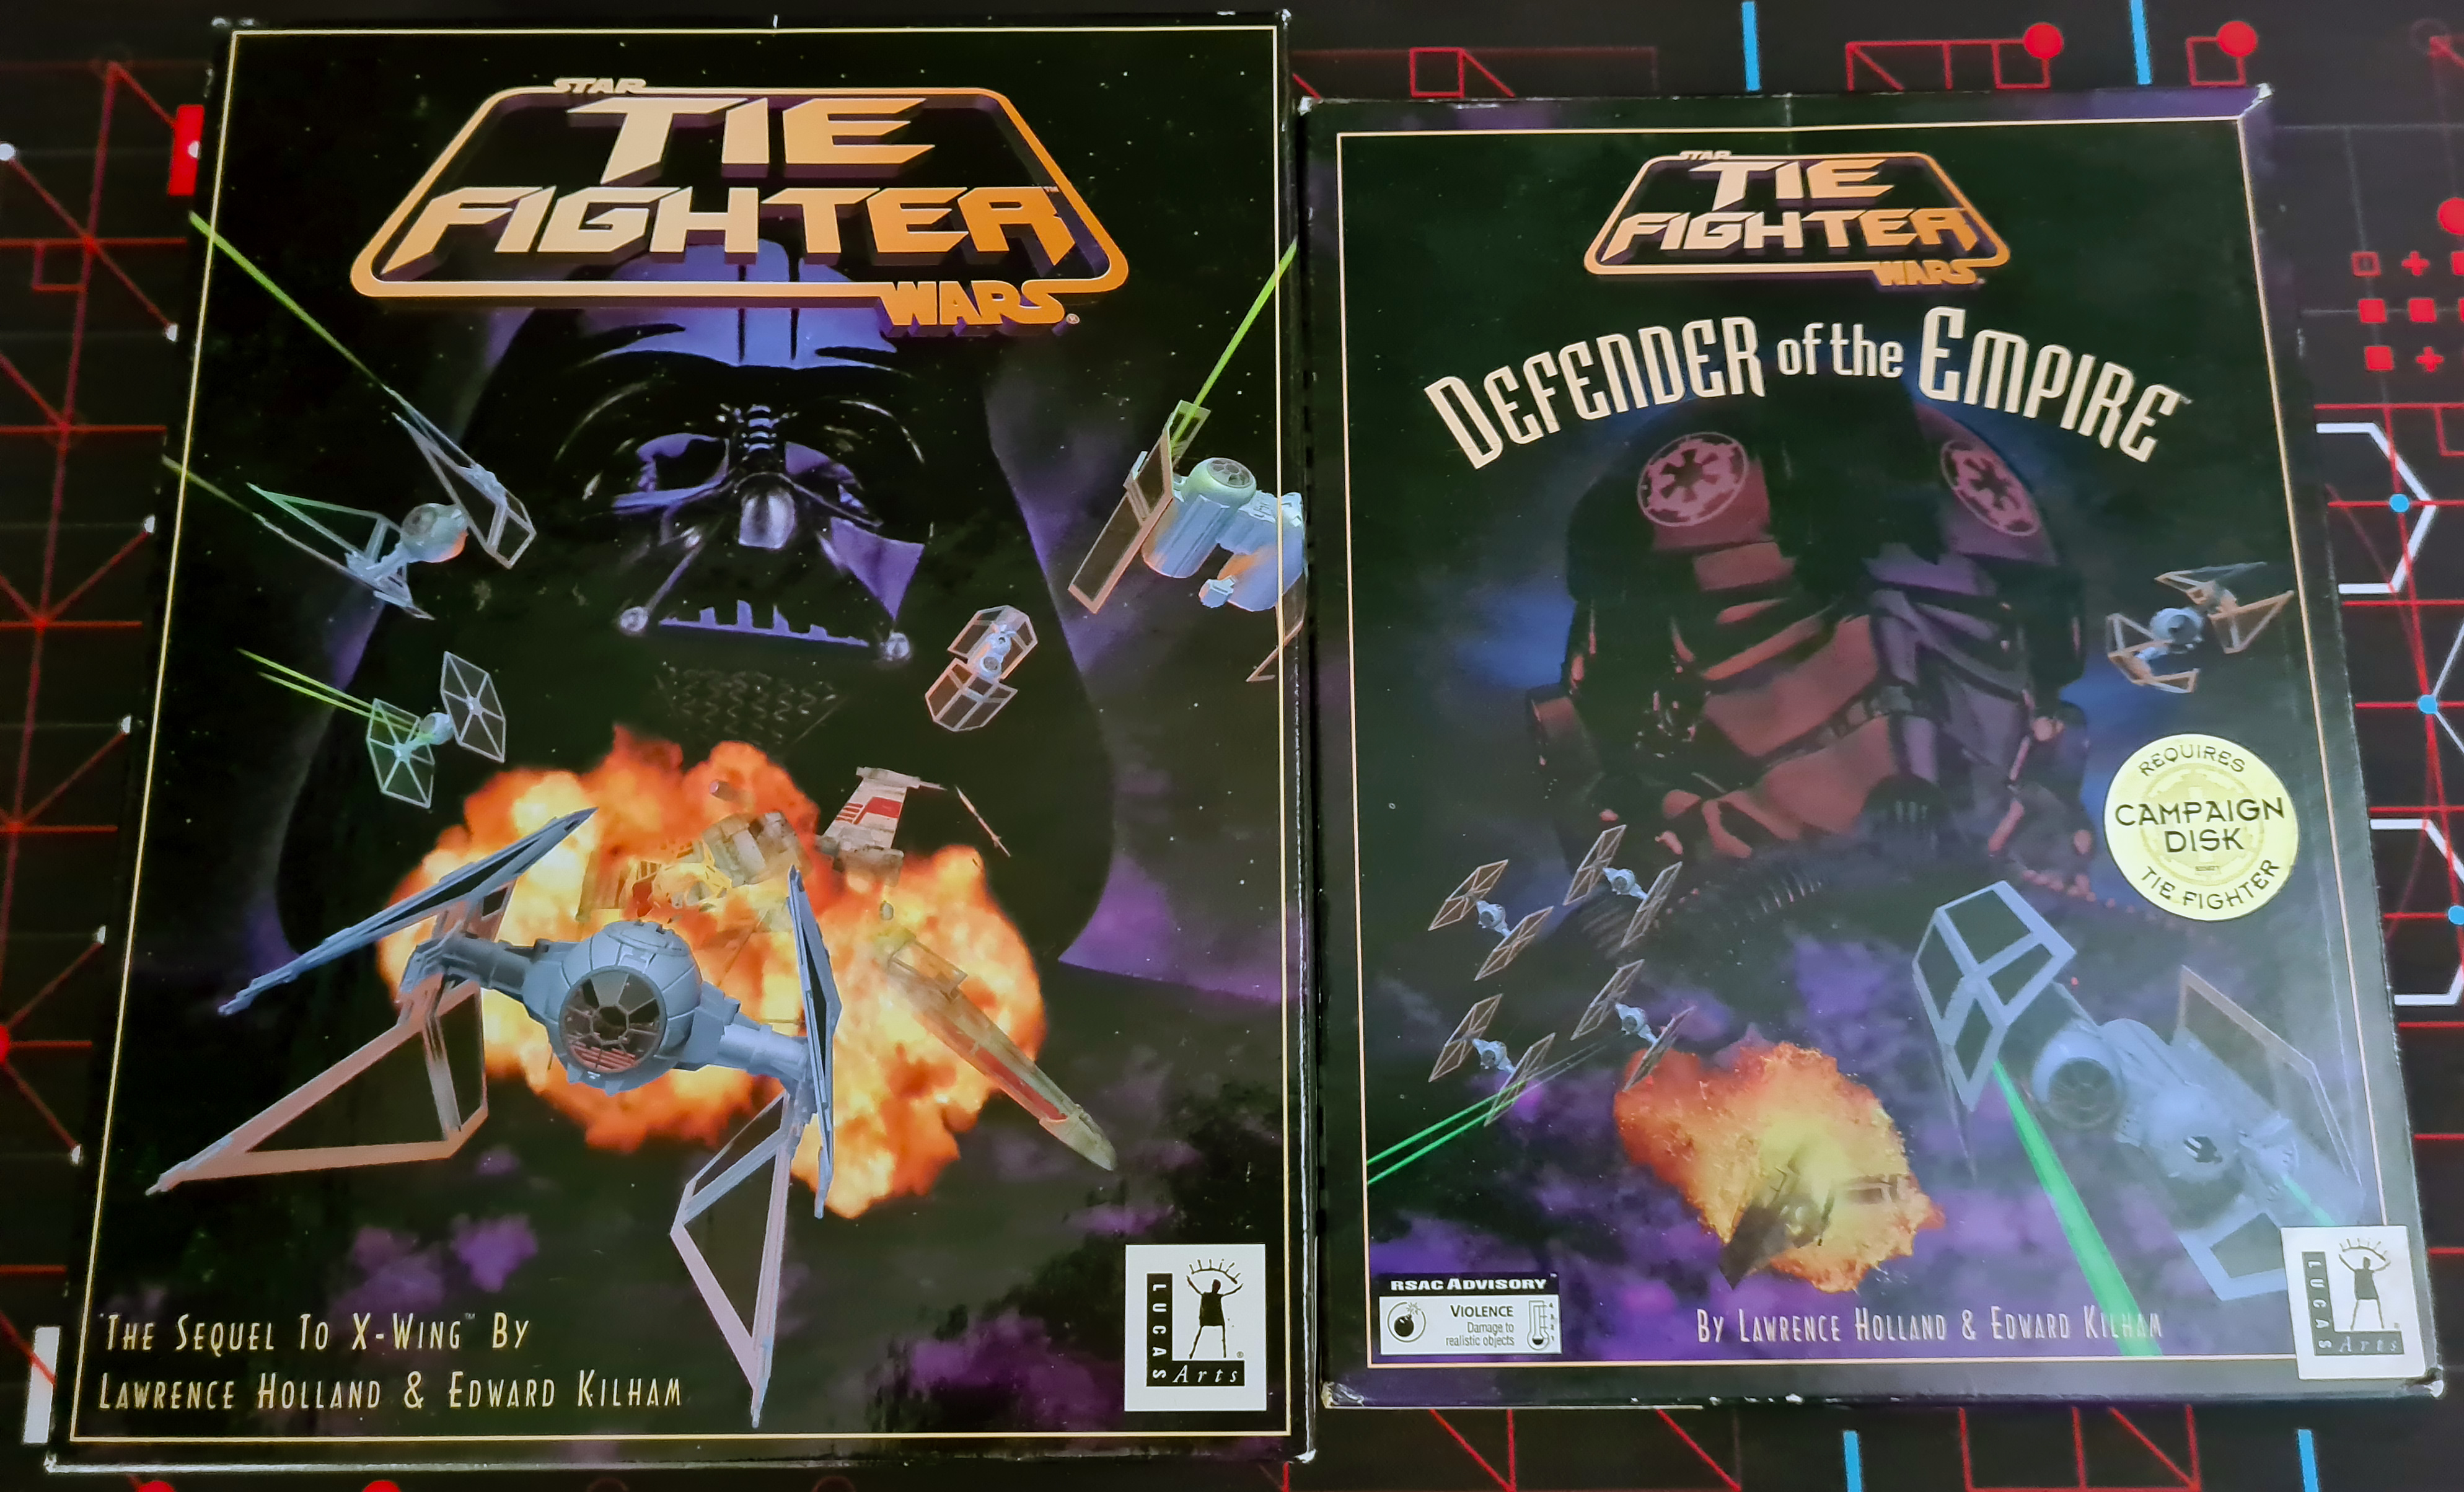 The original floppy disk release of TIE Fighter, and the Defender of the Empire expansion